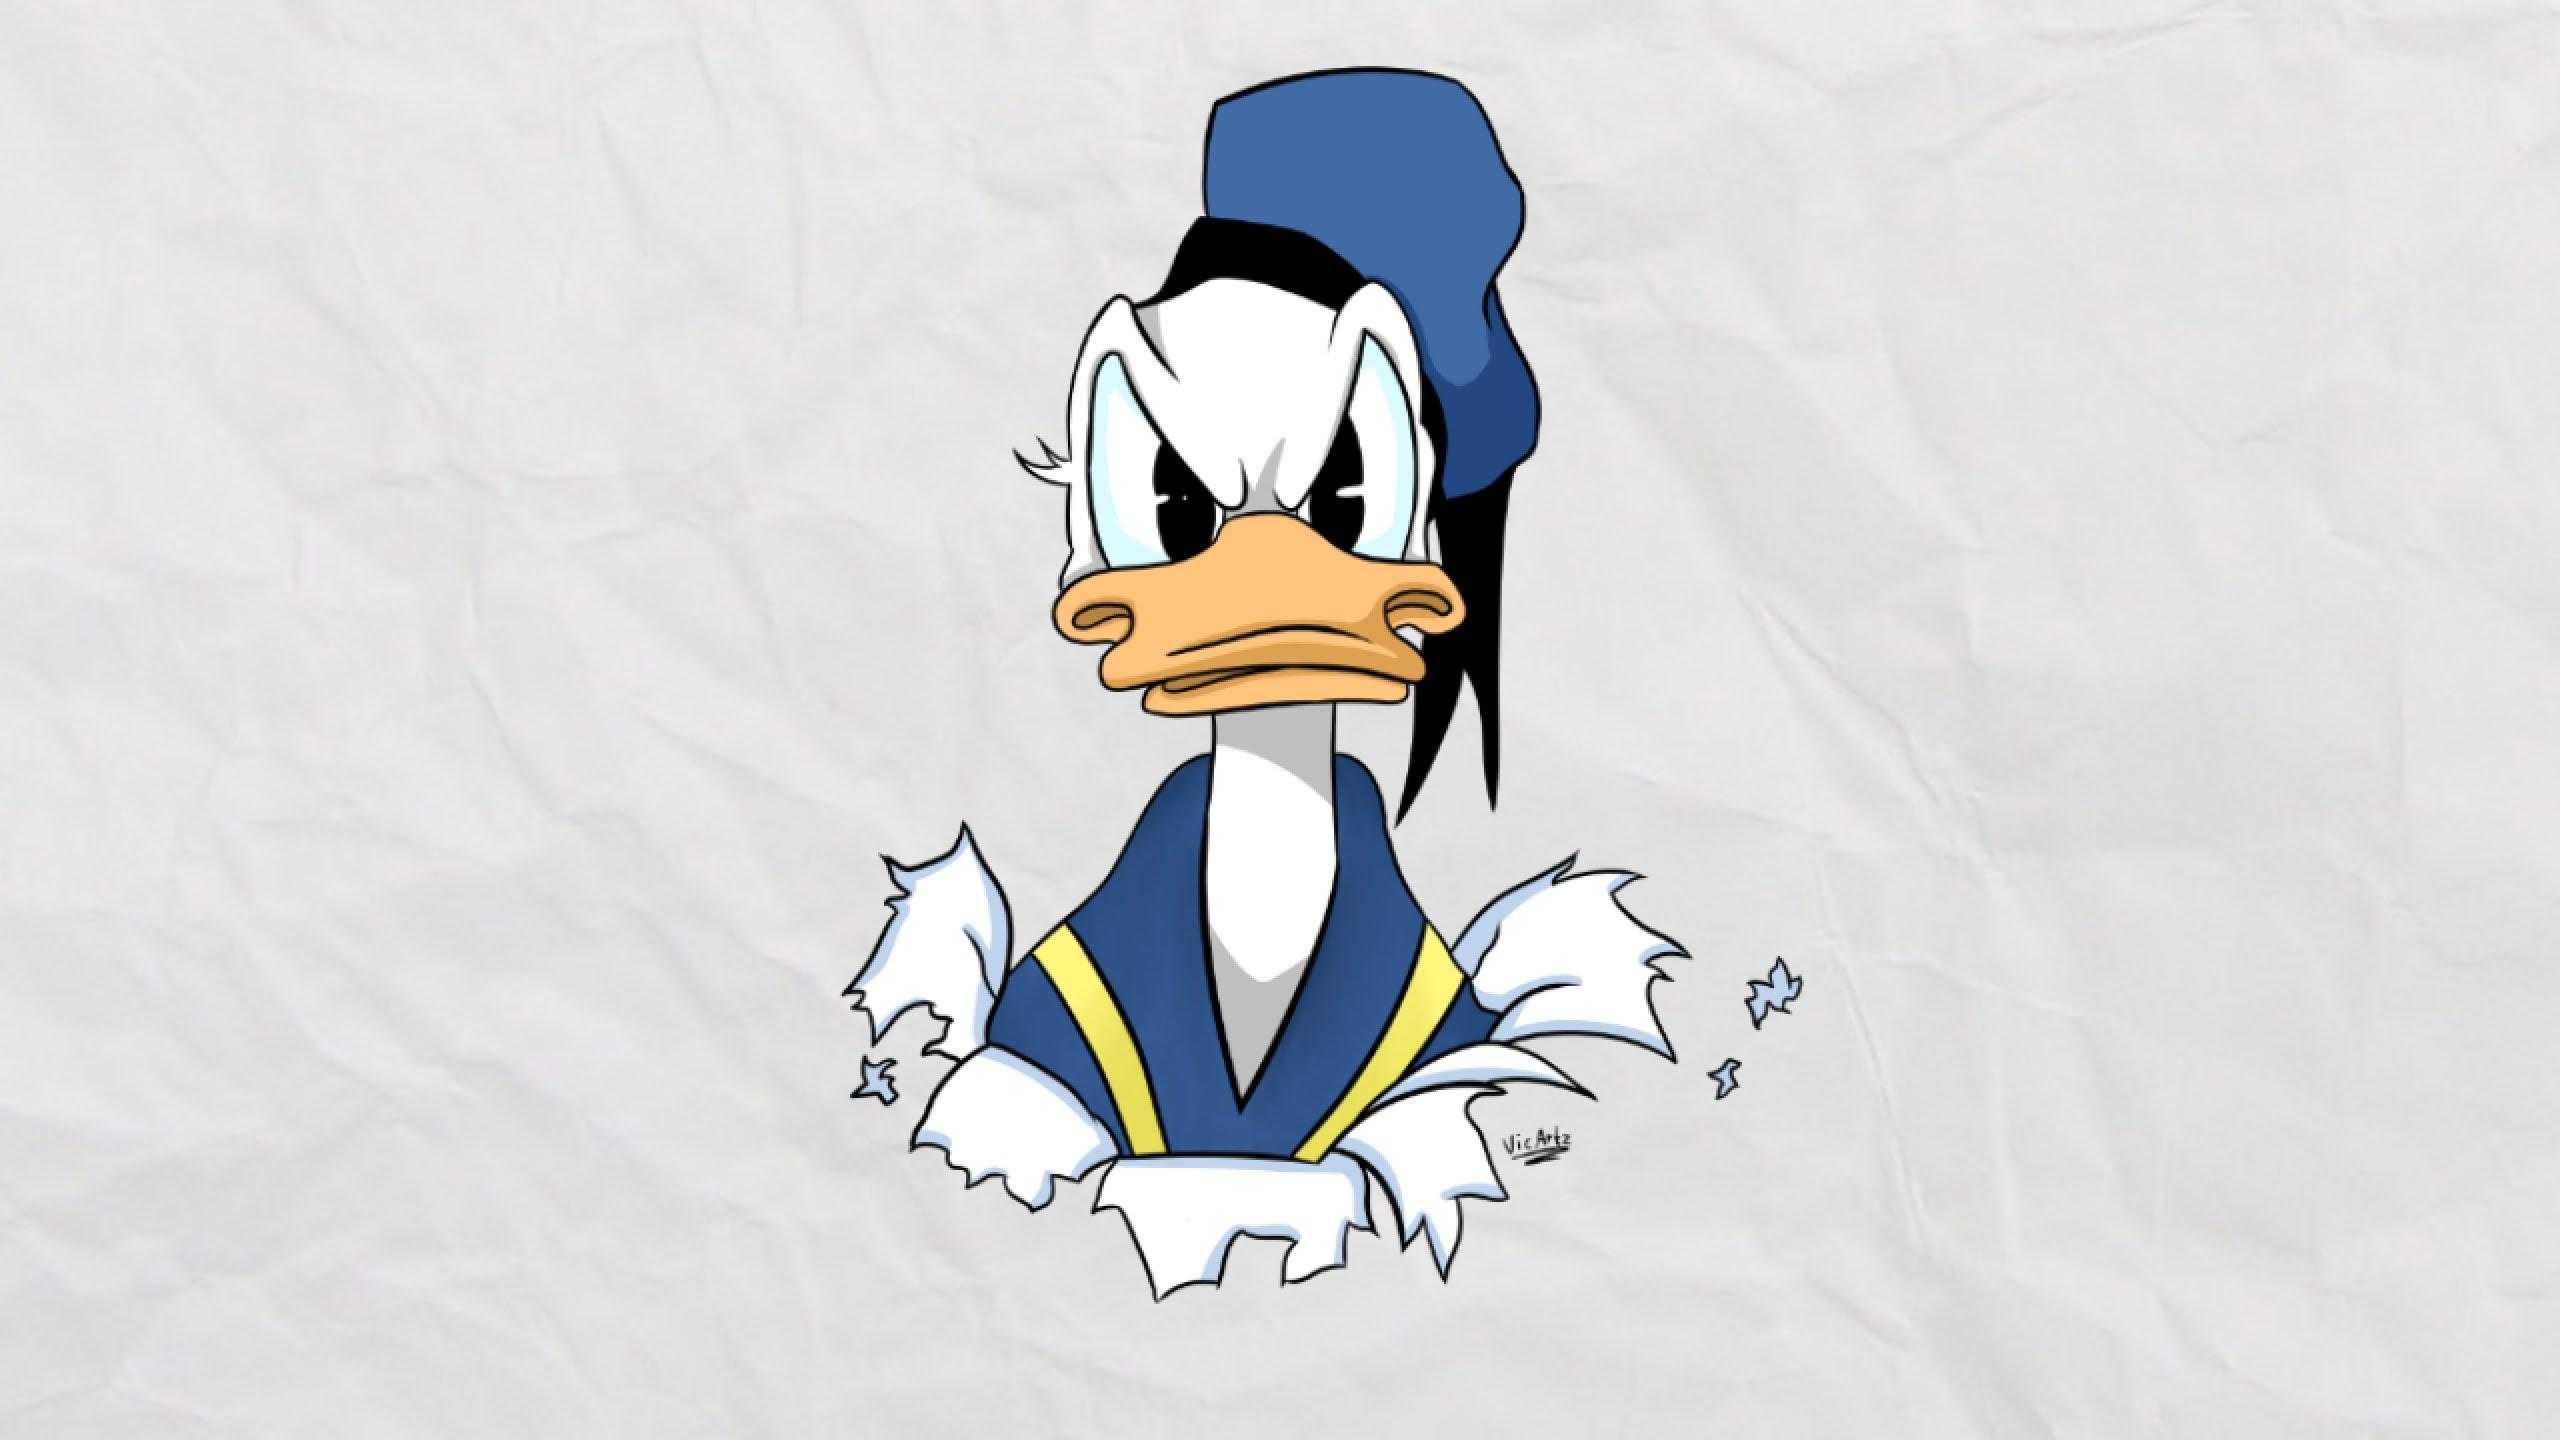 donald duck angry wallpaper